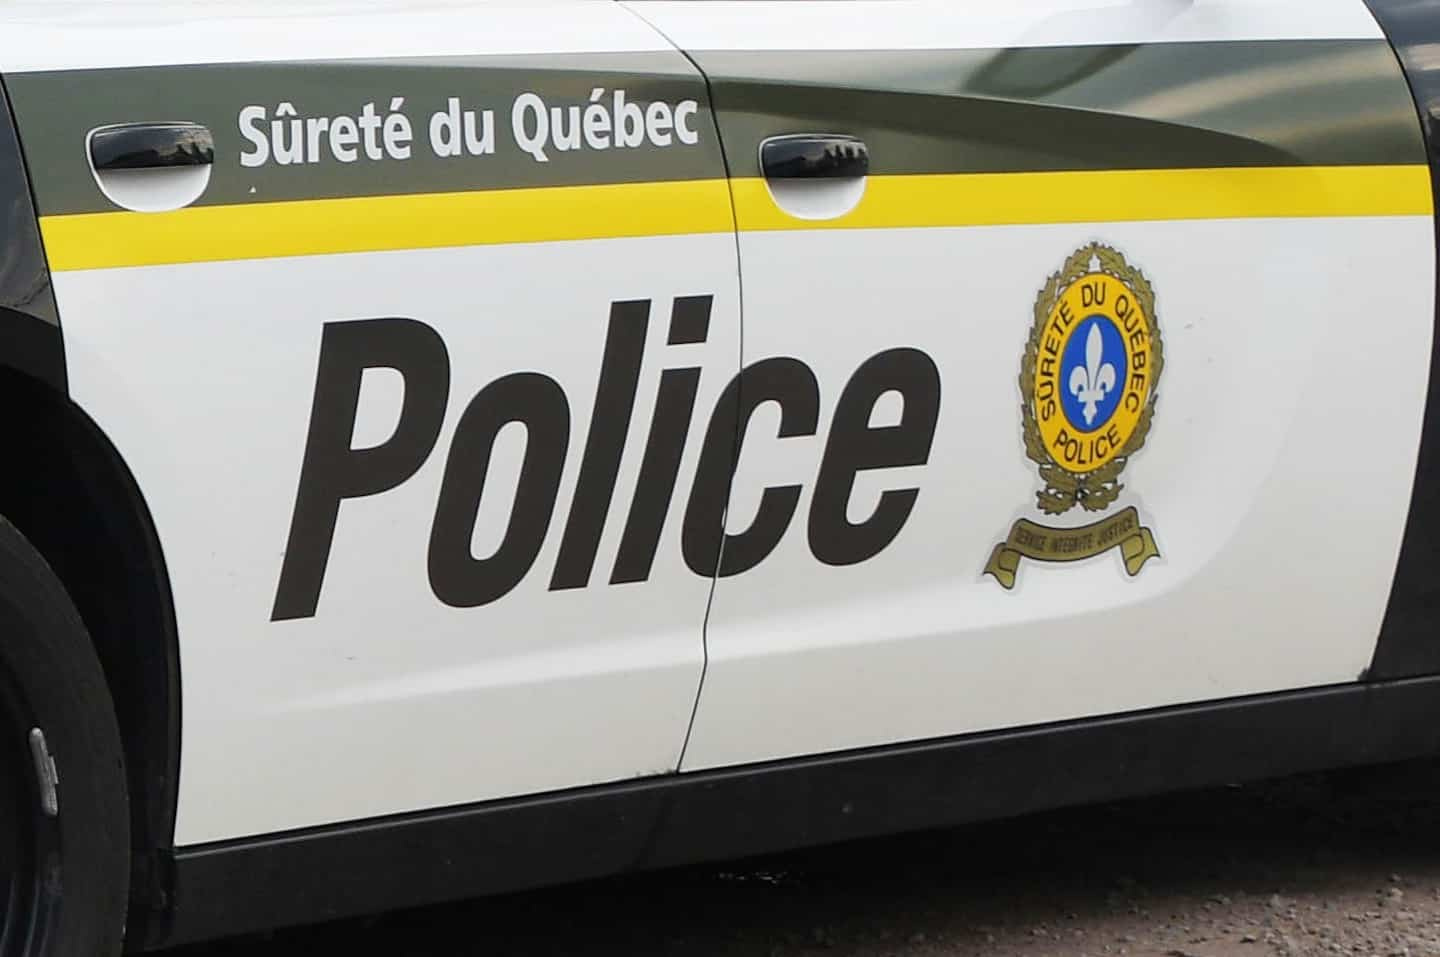 A motorcyclist seriously injured in a swerve in Sainte-Adèle